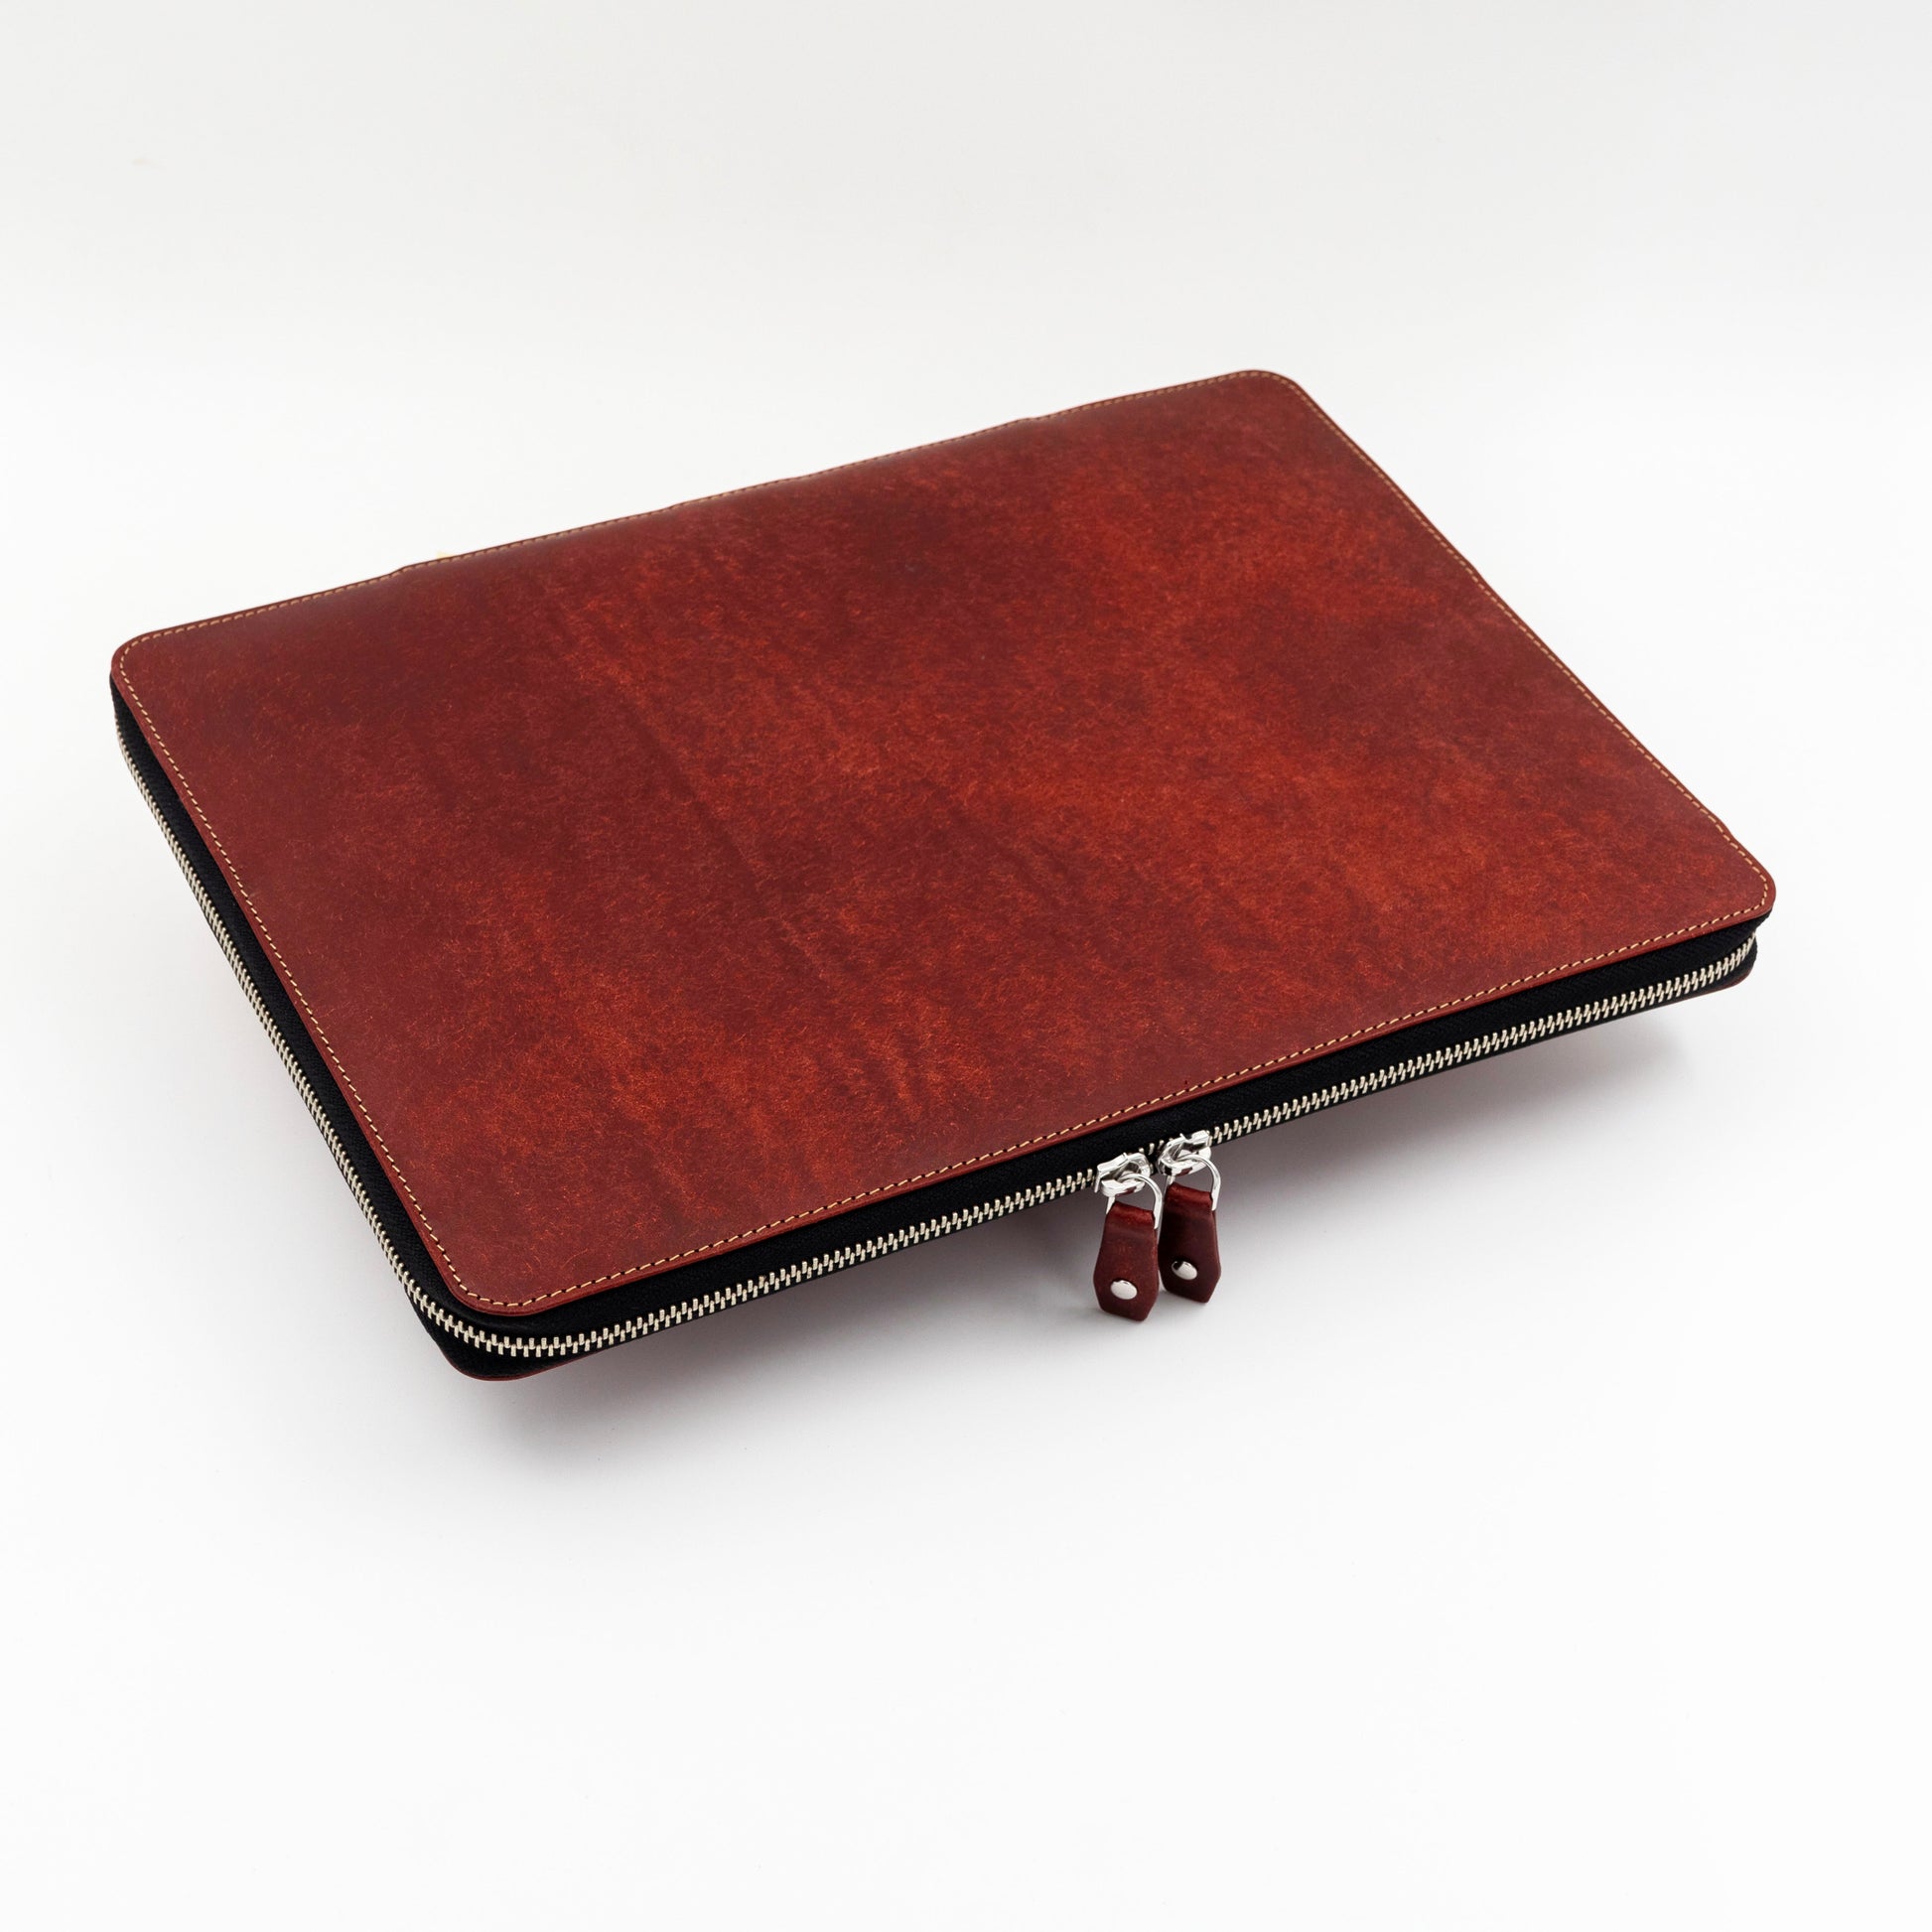 The leather case for Dell XPS 13 in Coccinella vegetable tanned 'Pueblo' leather